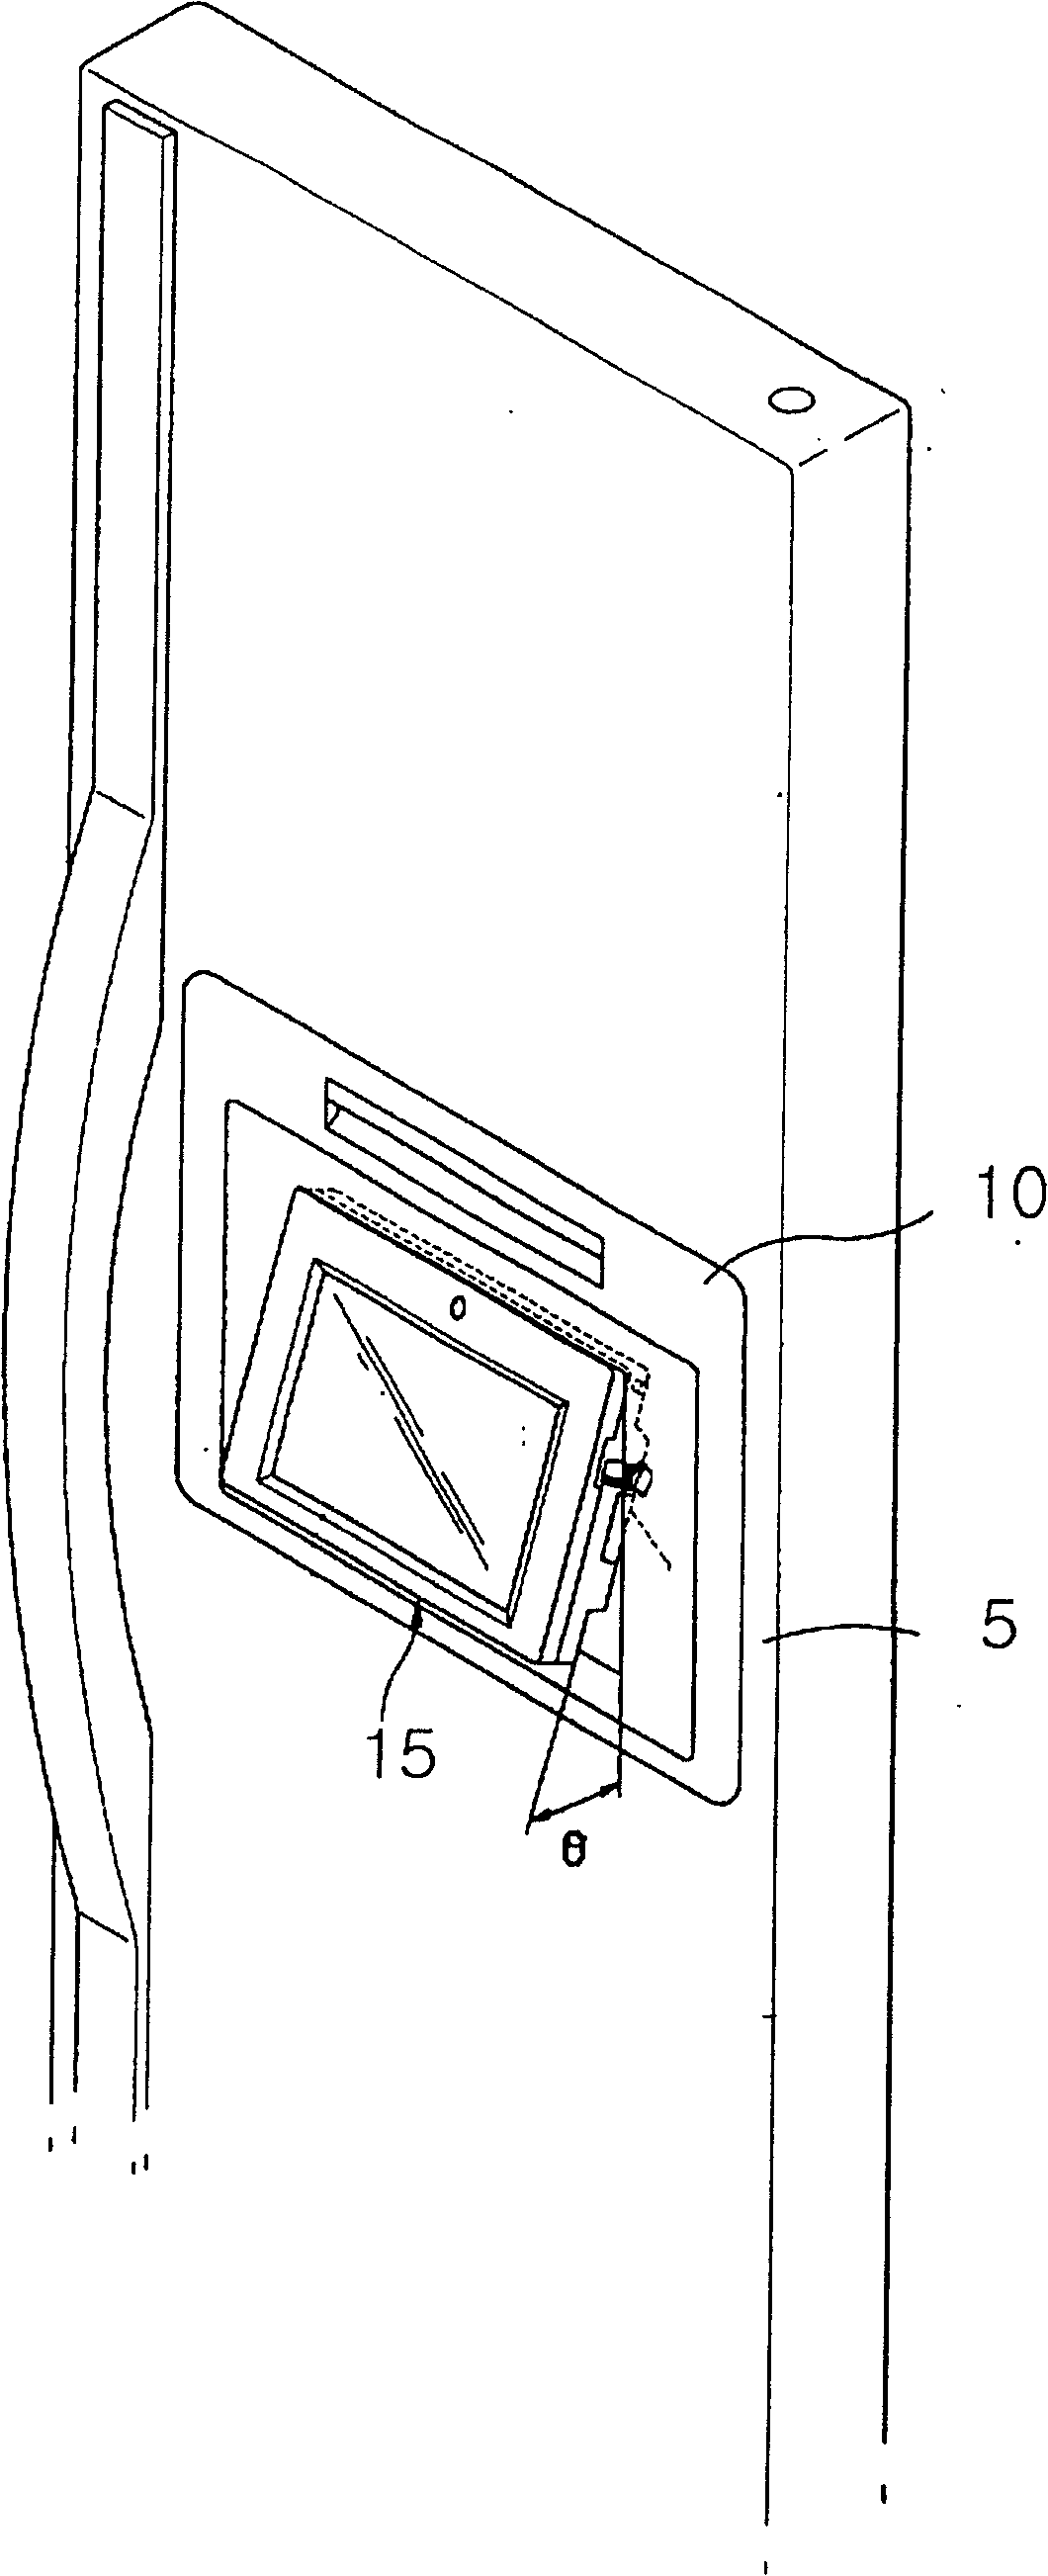 Refrigerator with display part